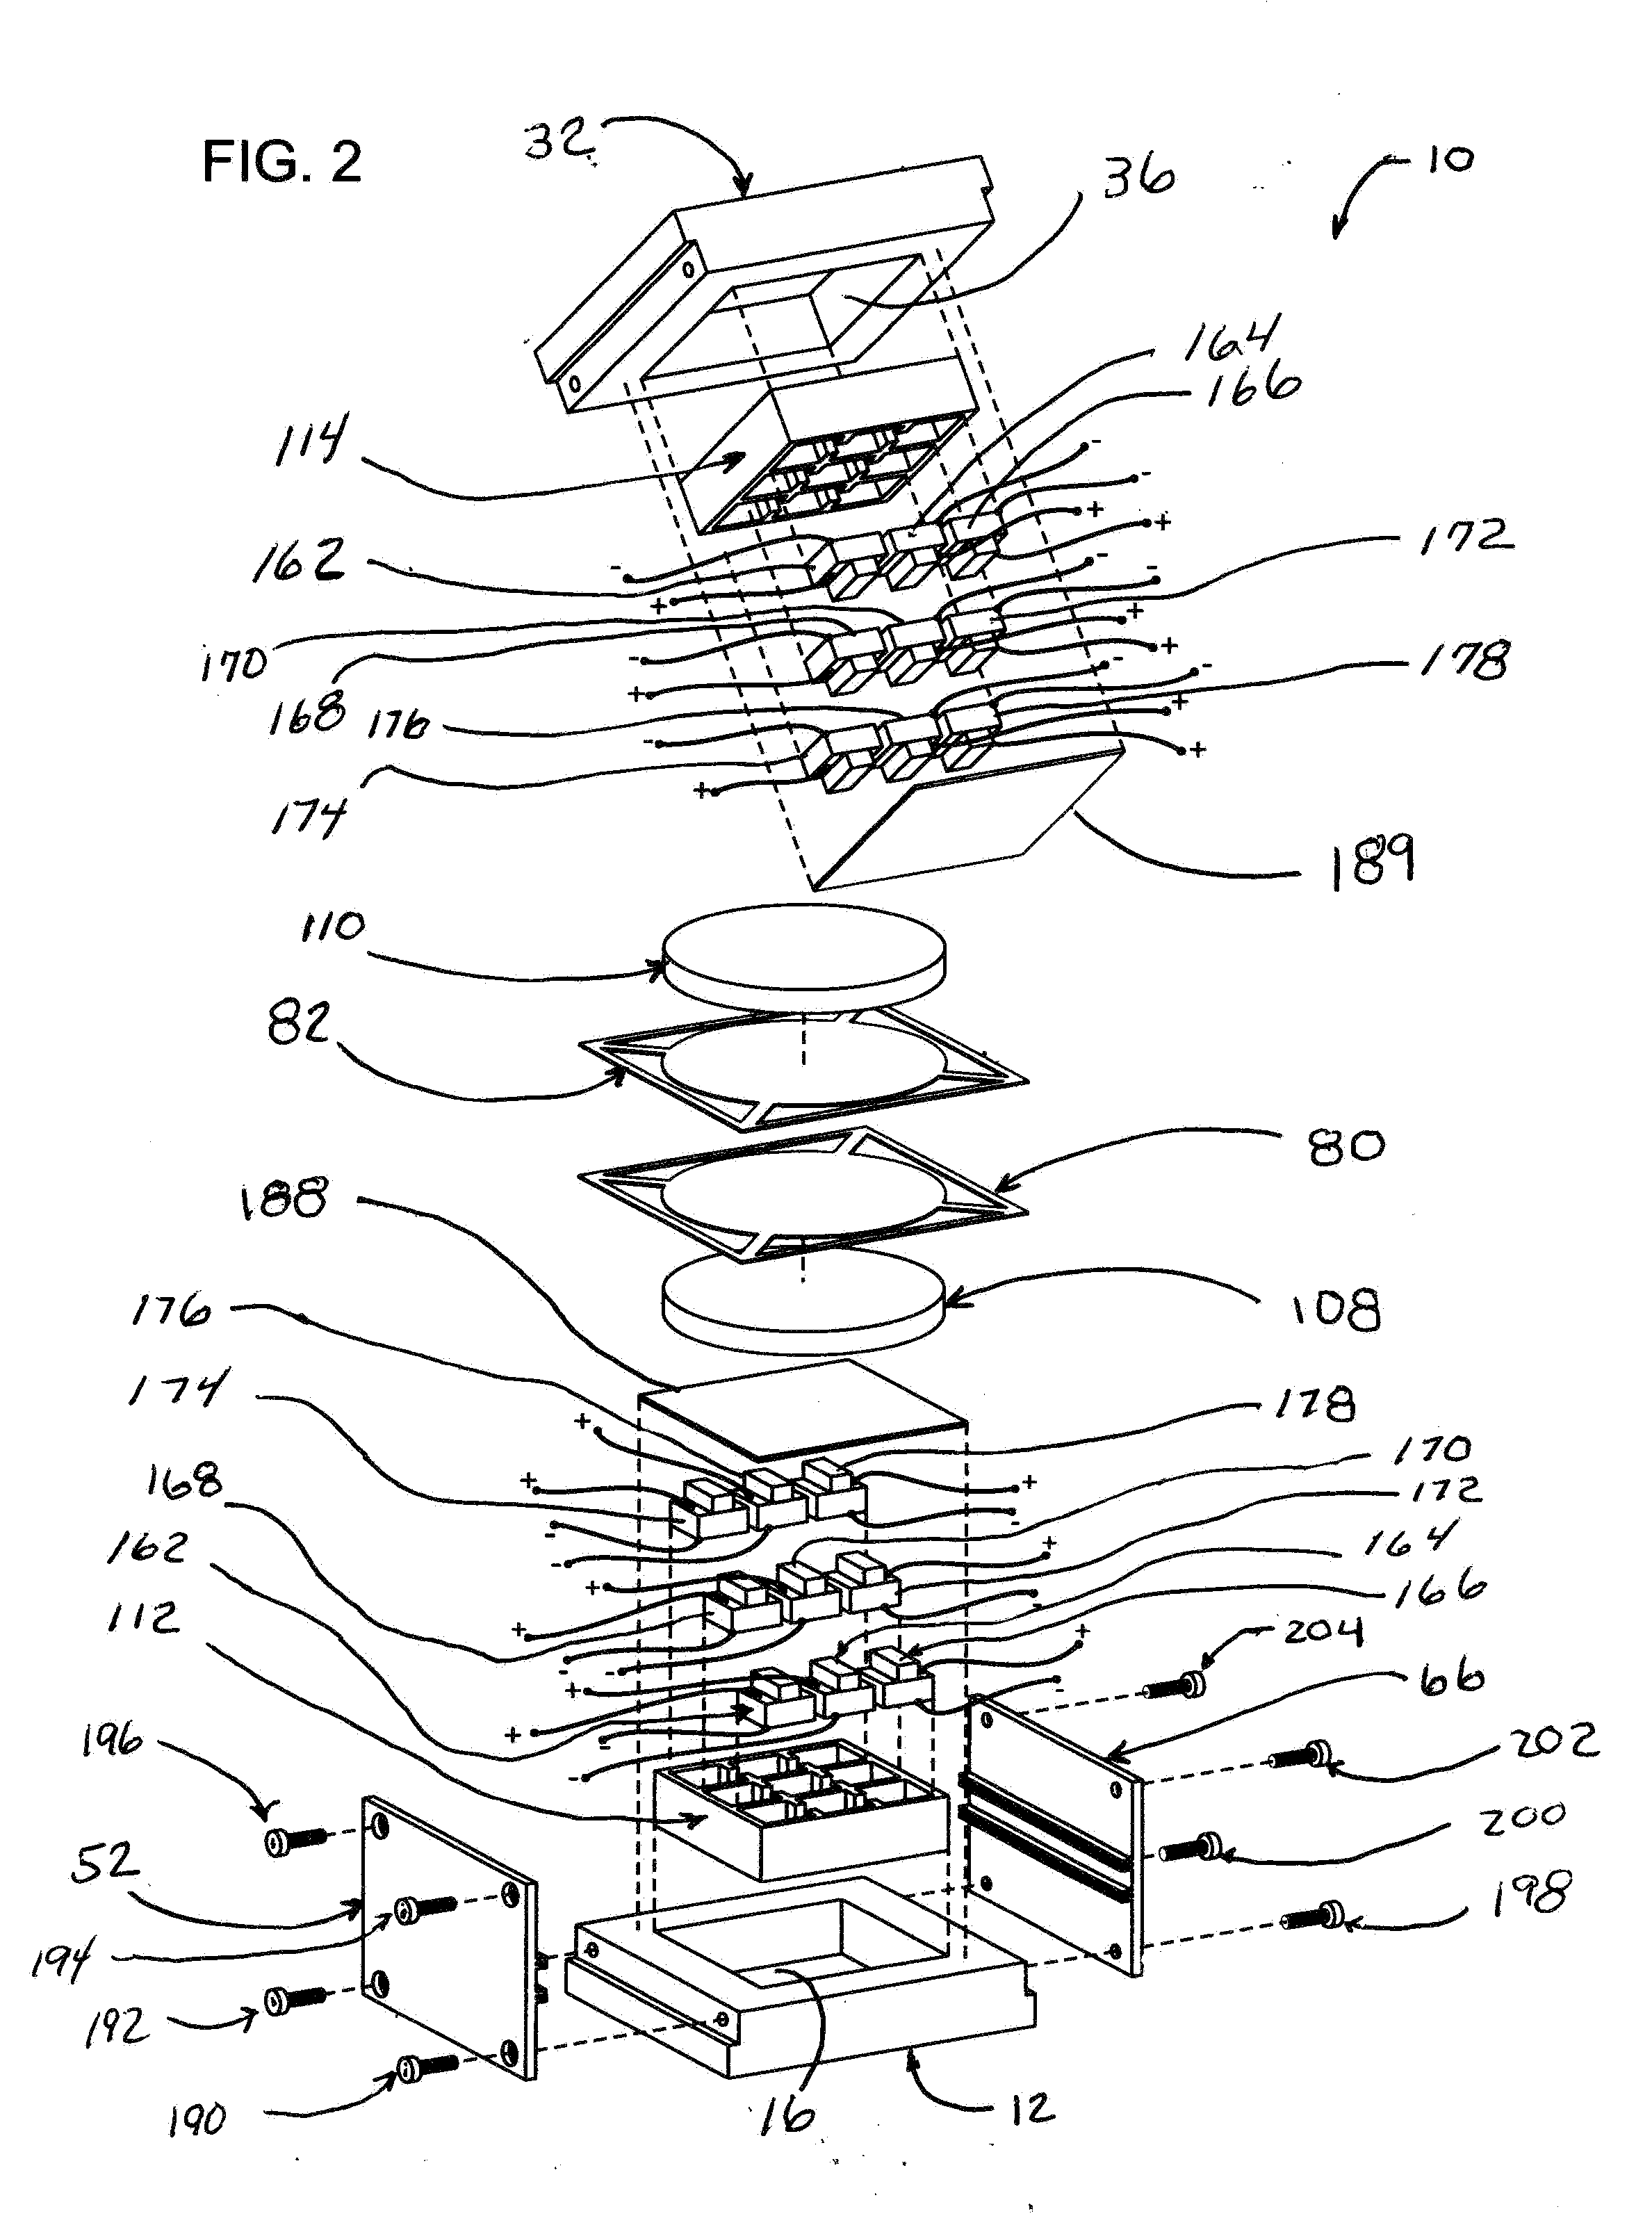 Device and Method For Harvesting Energy